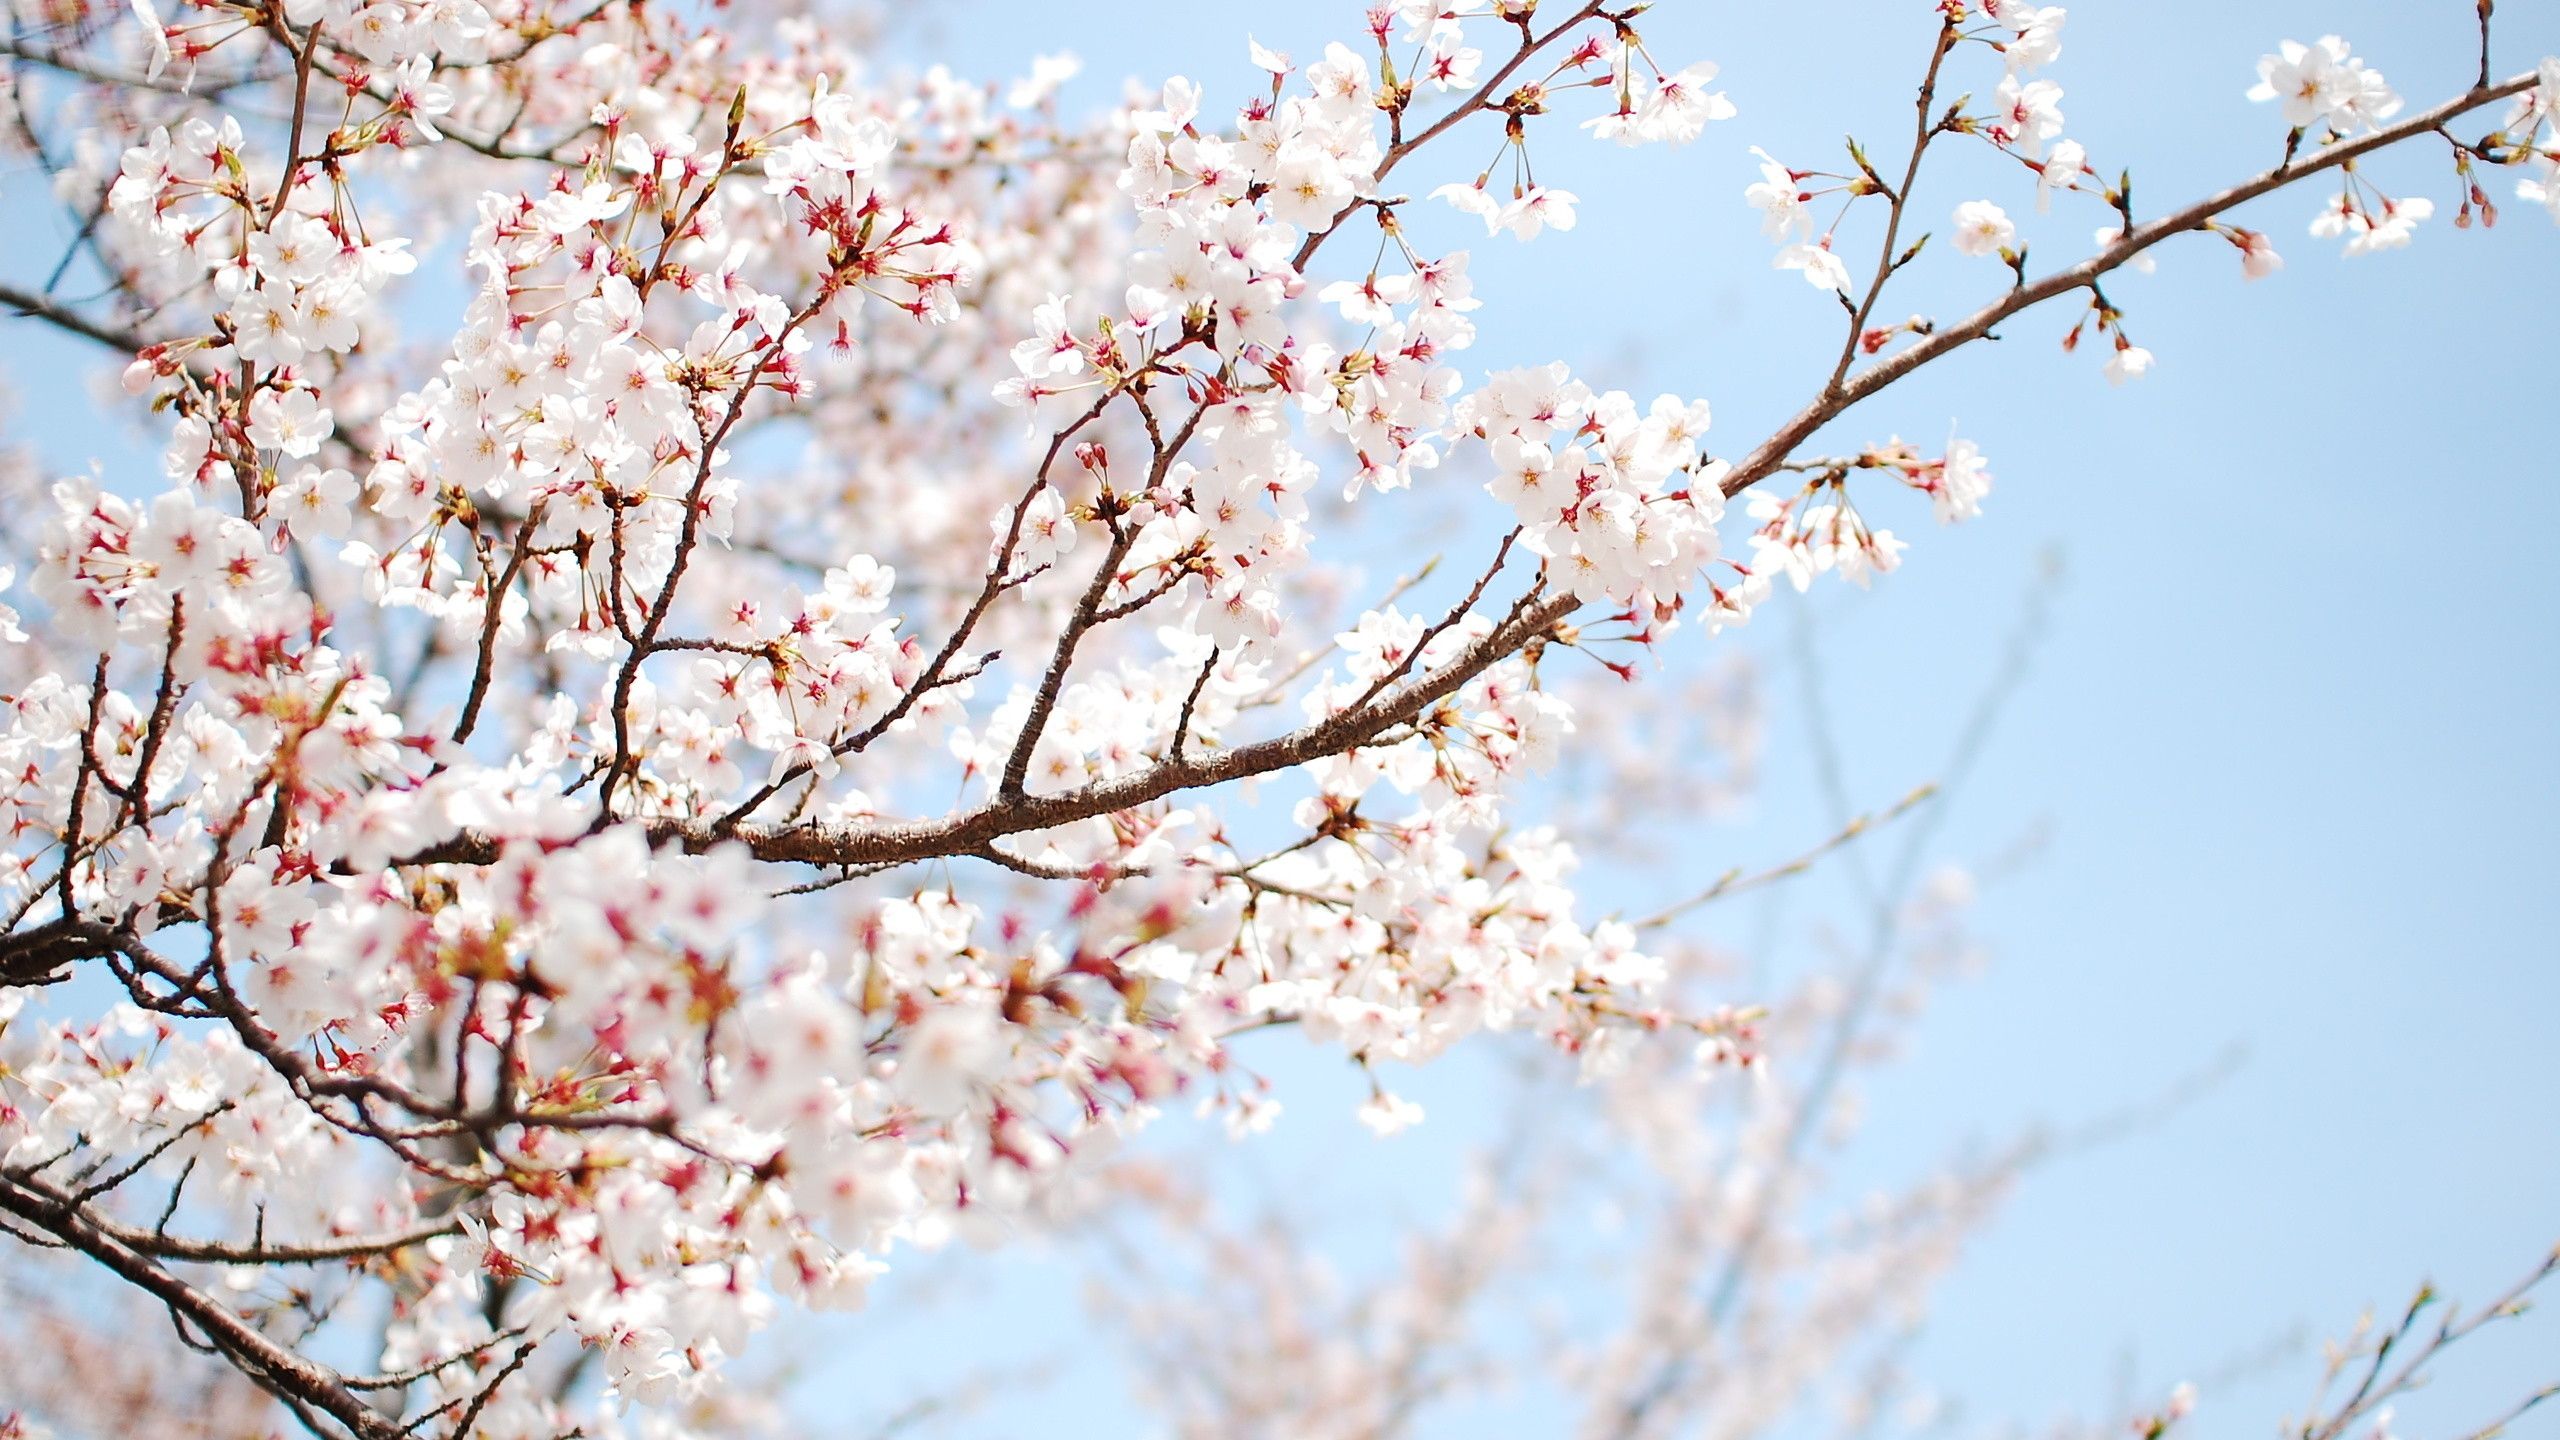 A tree with white flowers on it - Cherry blossom